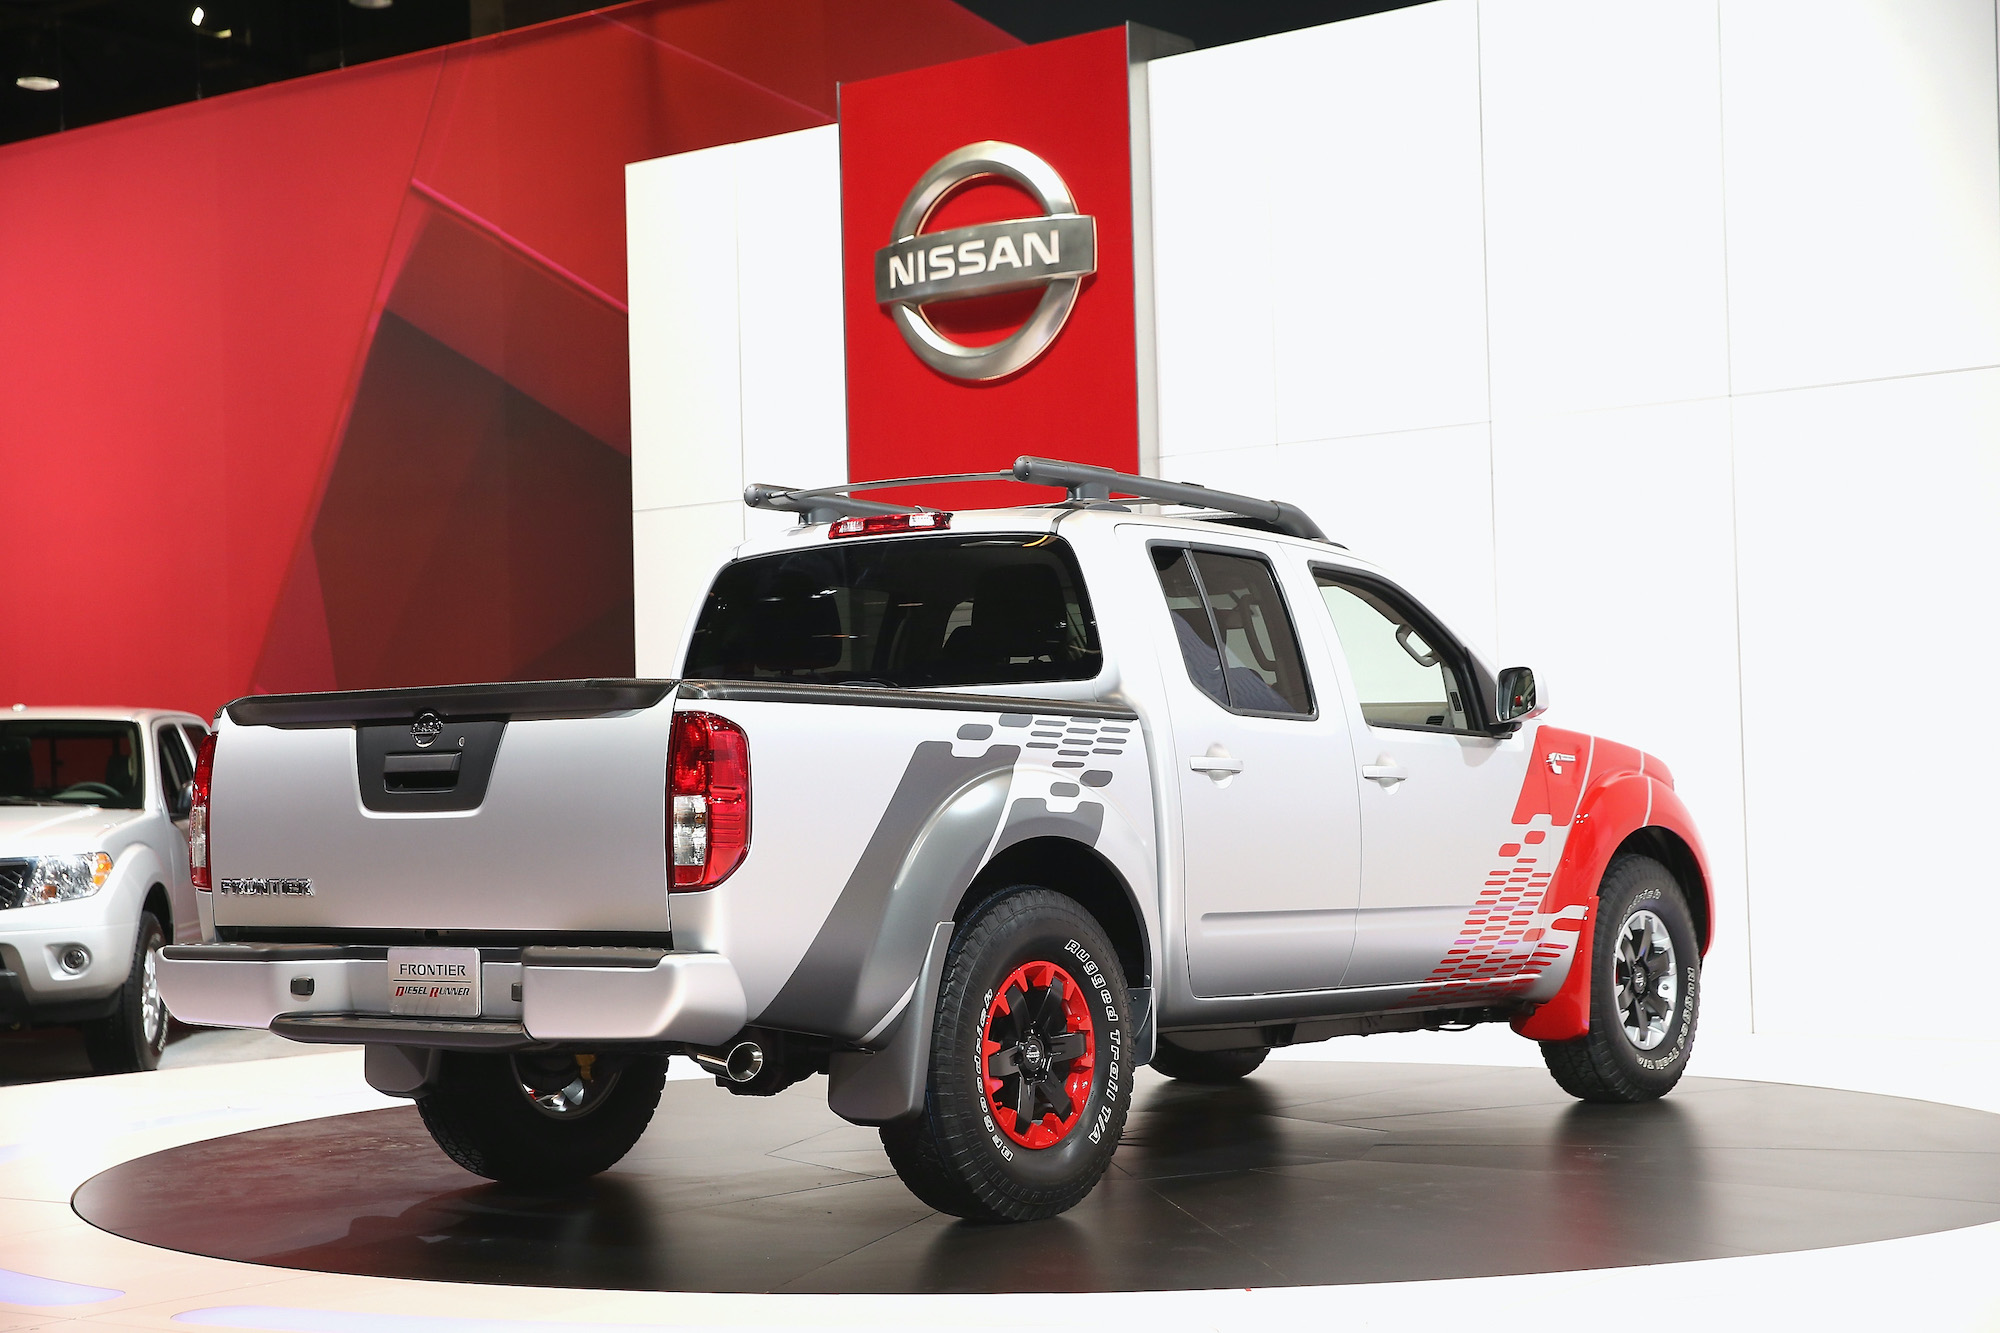 Nissan introduces the Cummins Diesel powered Frontier truck at the Chicago Auto Show